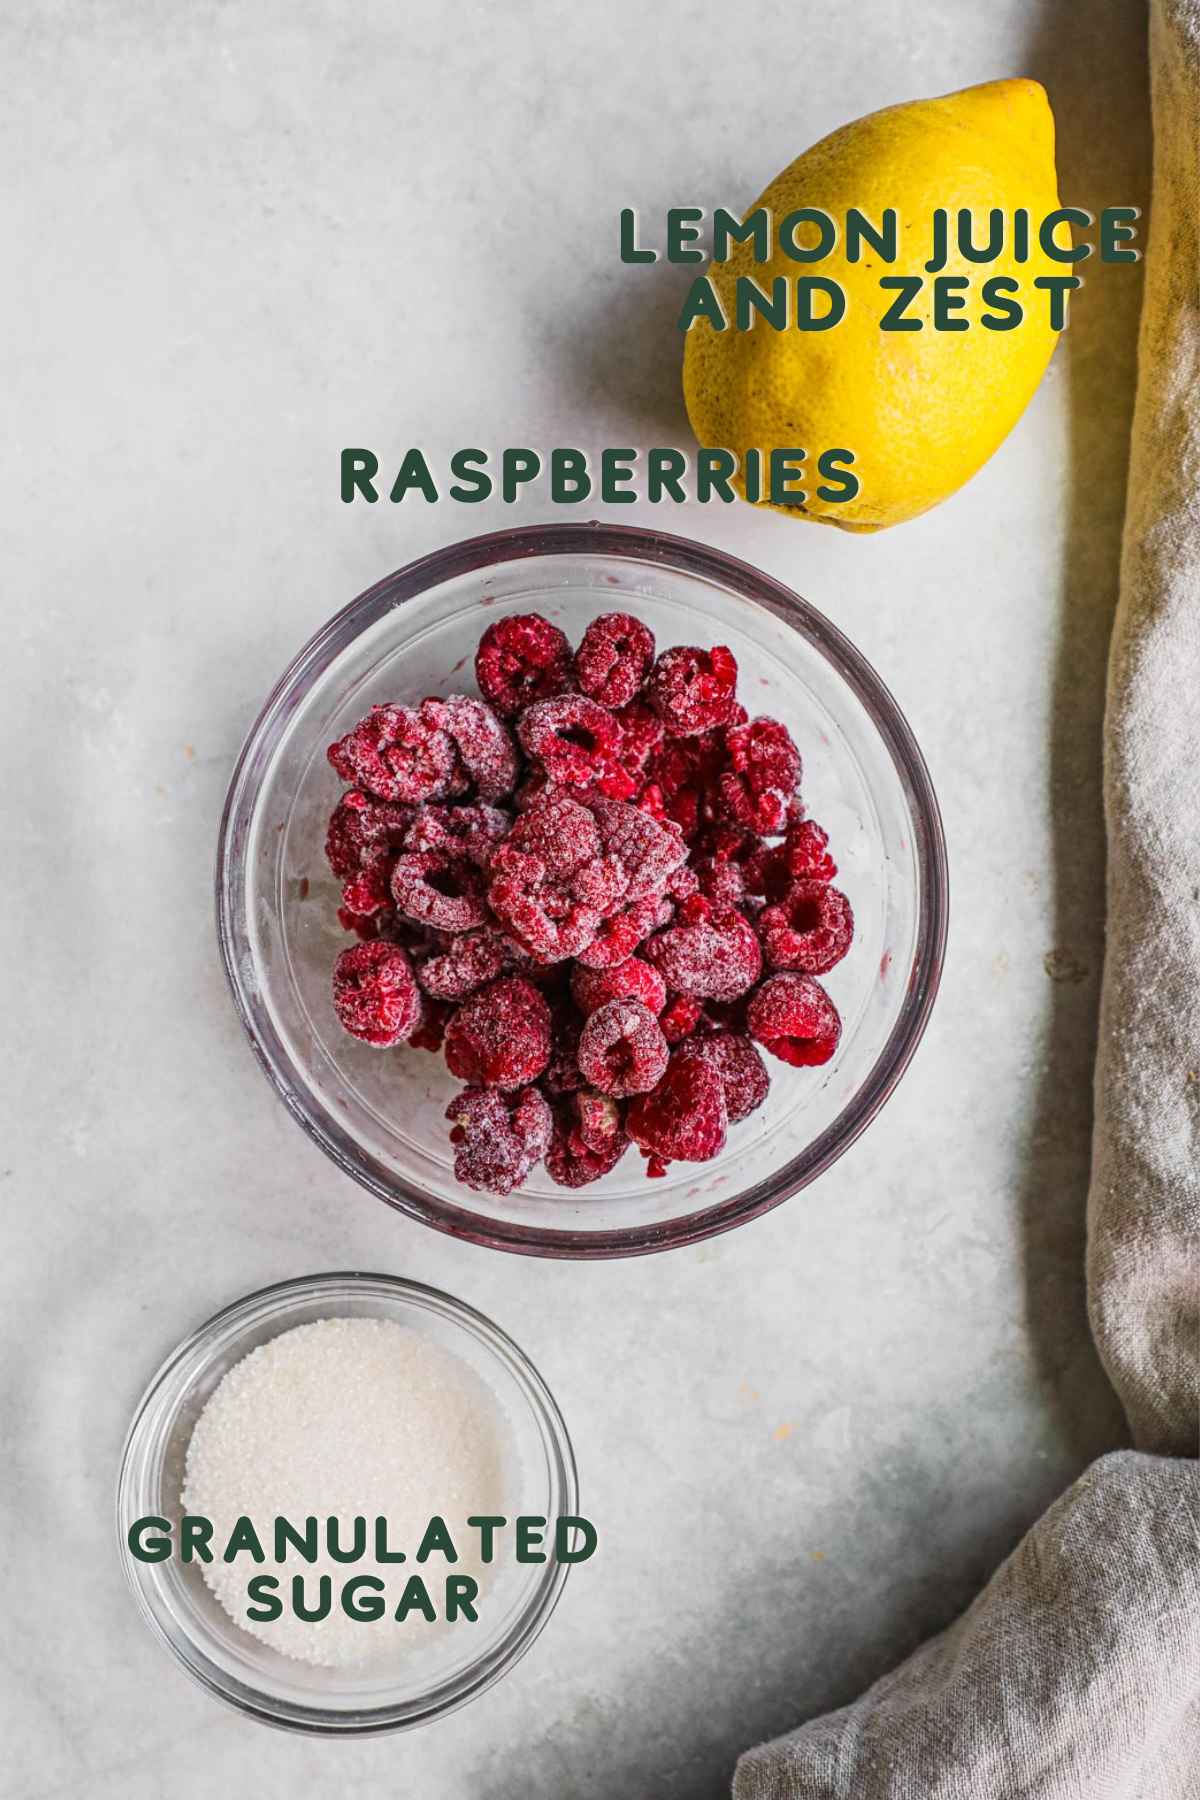 Ingredients to make raspberry compote, including raspberries, lemon juice and zest, and granulated sugar.